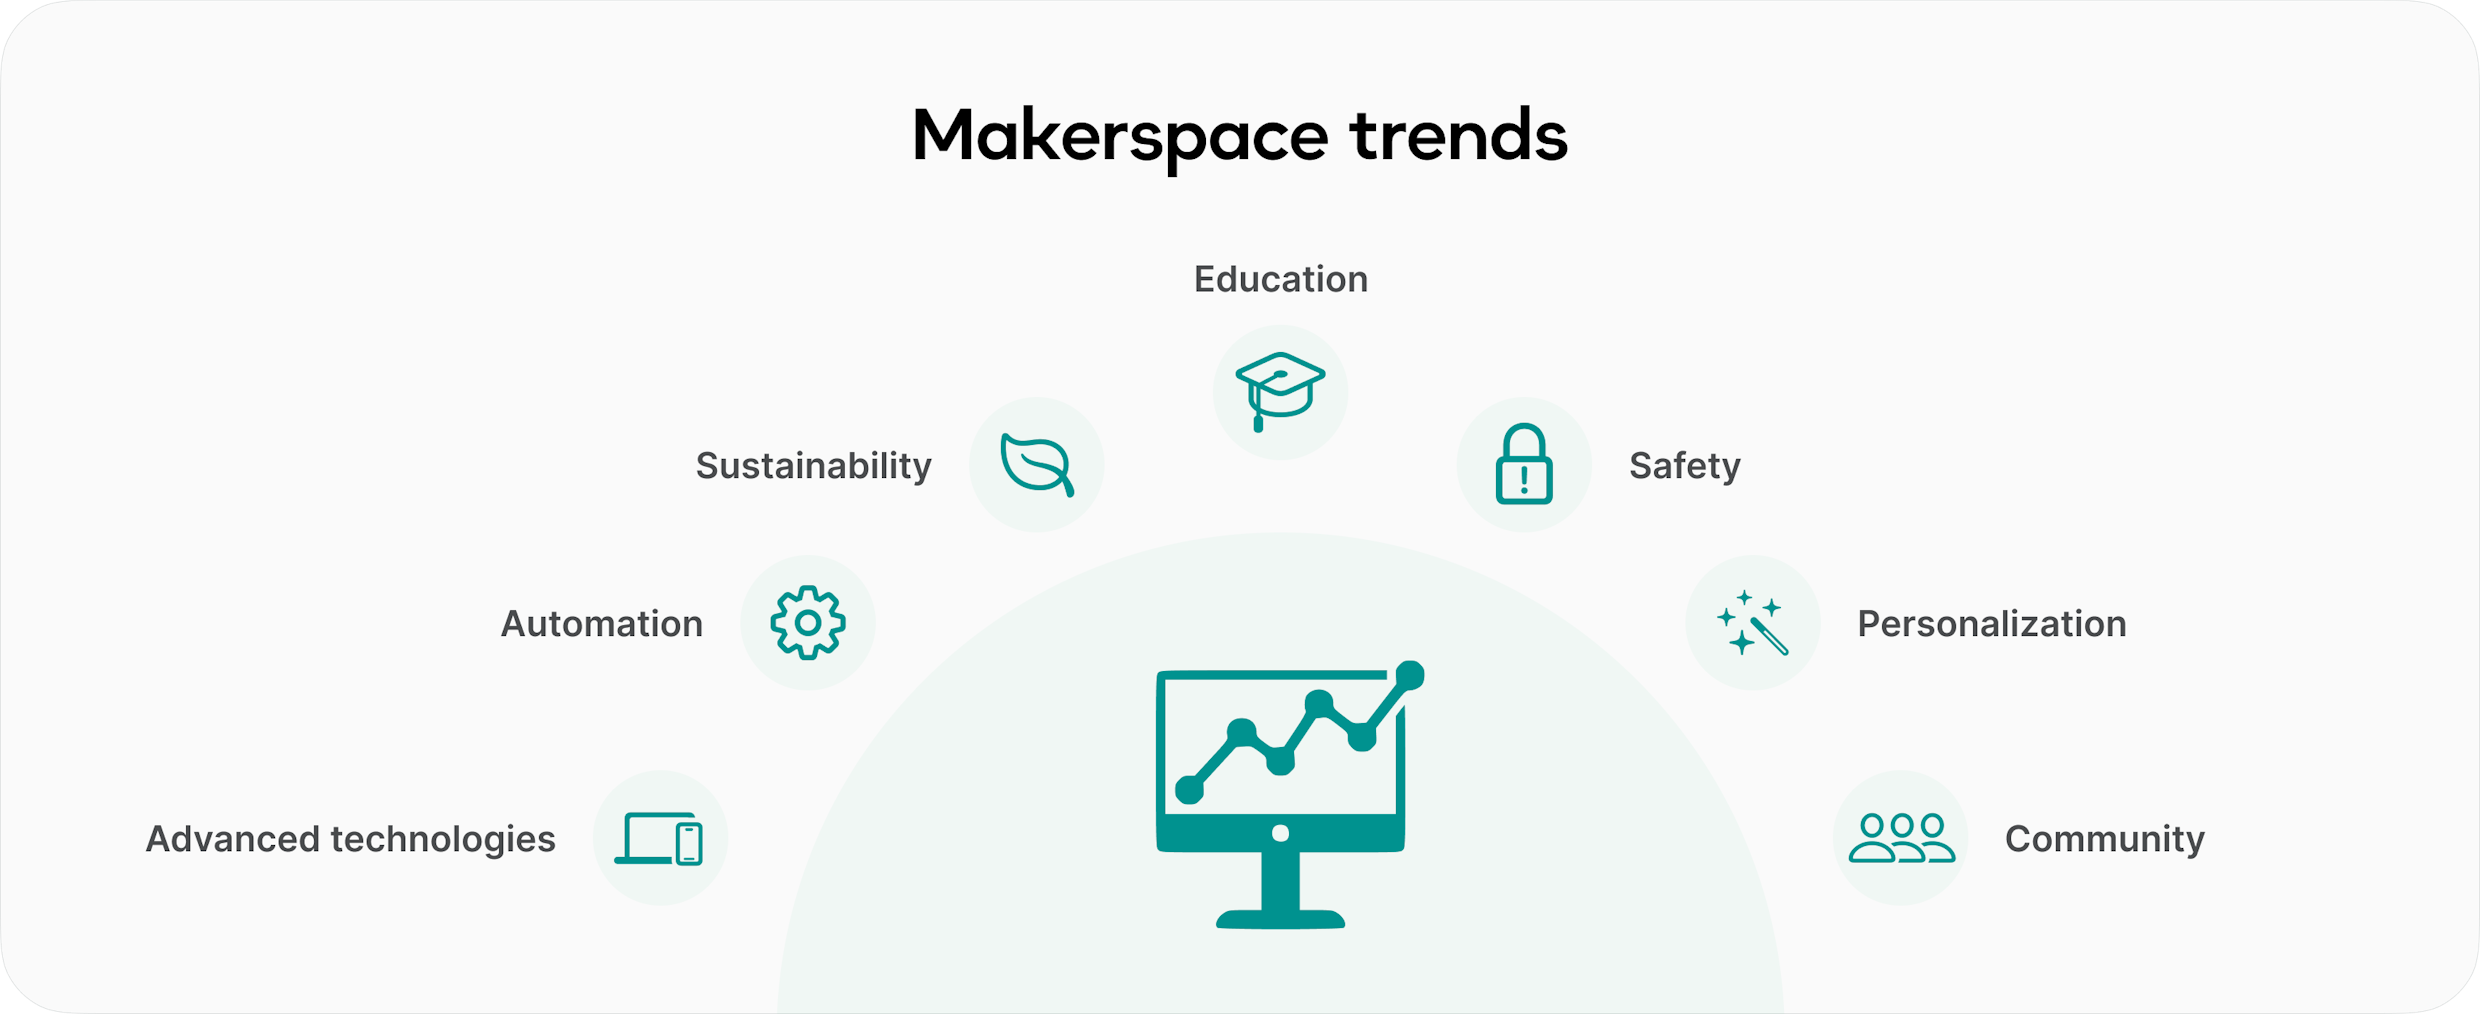 Future makerspace trends